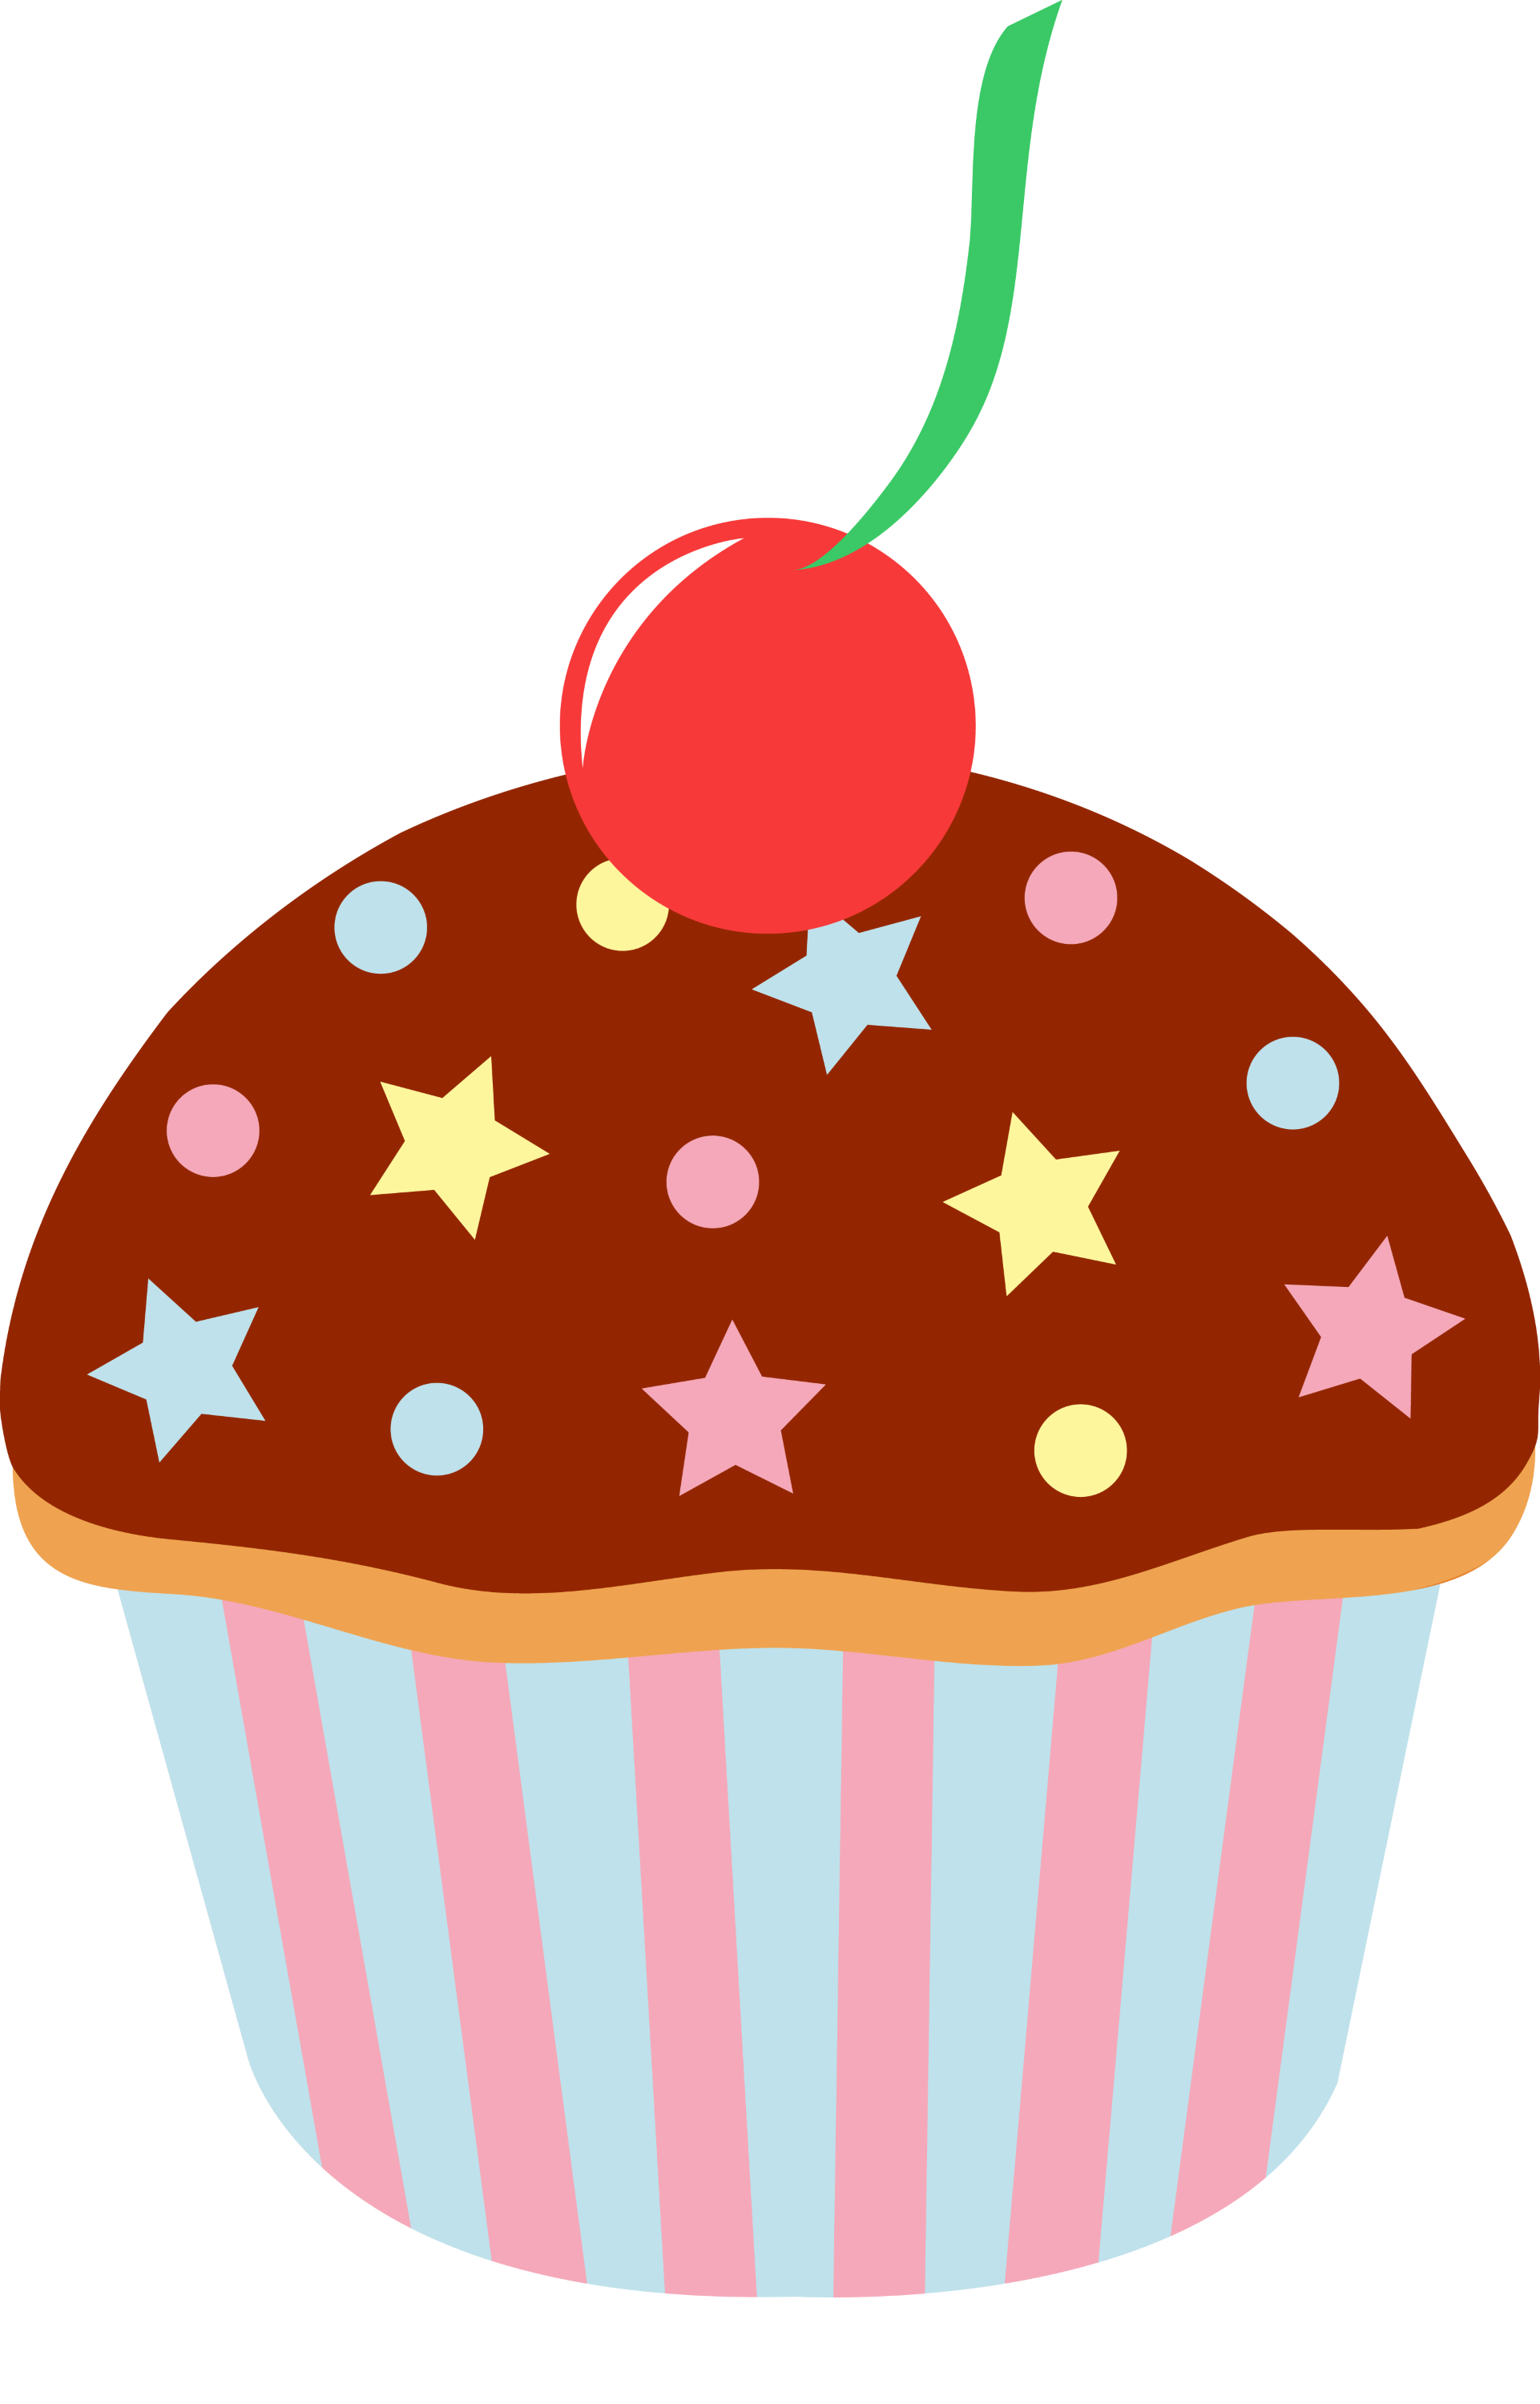 free clipart cupcakes - photo #15